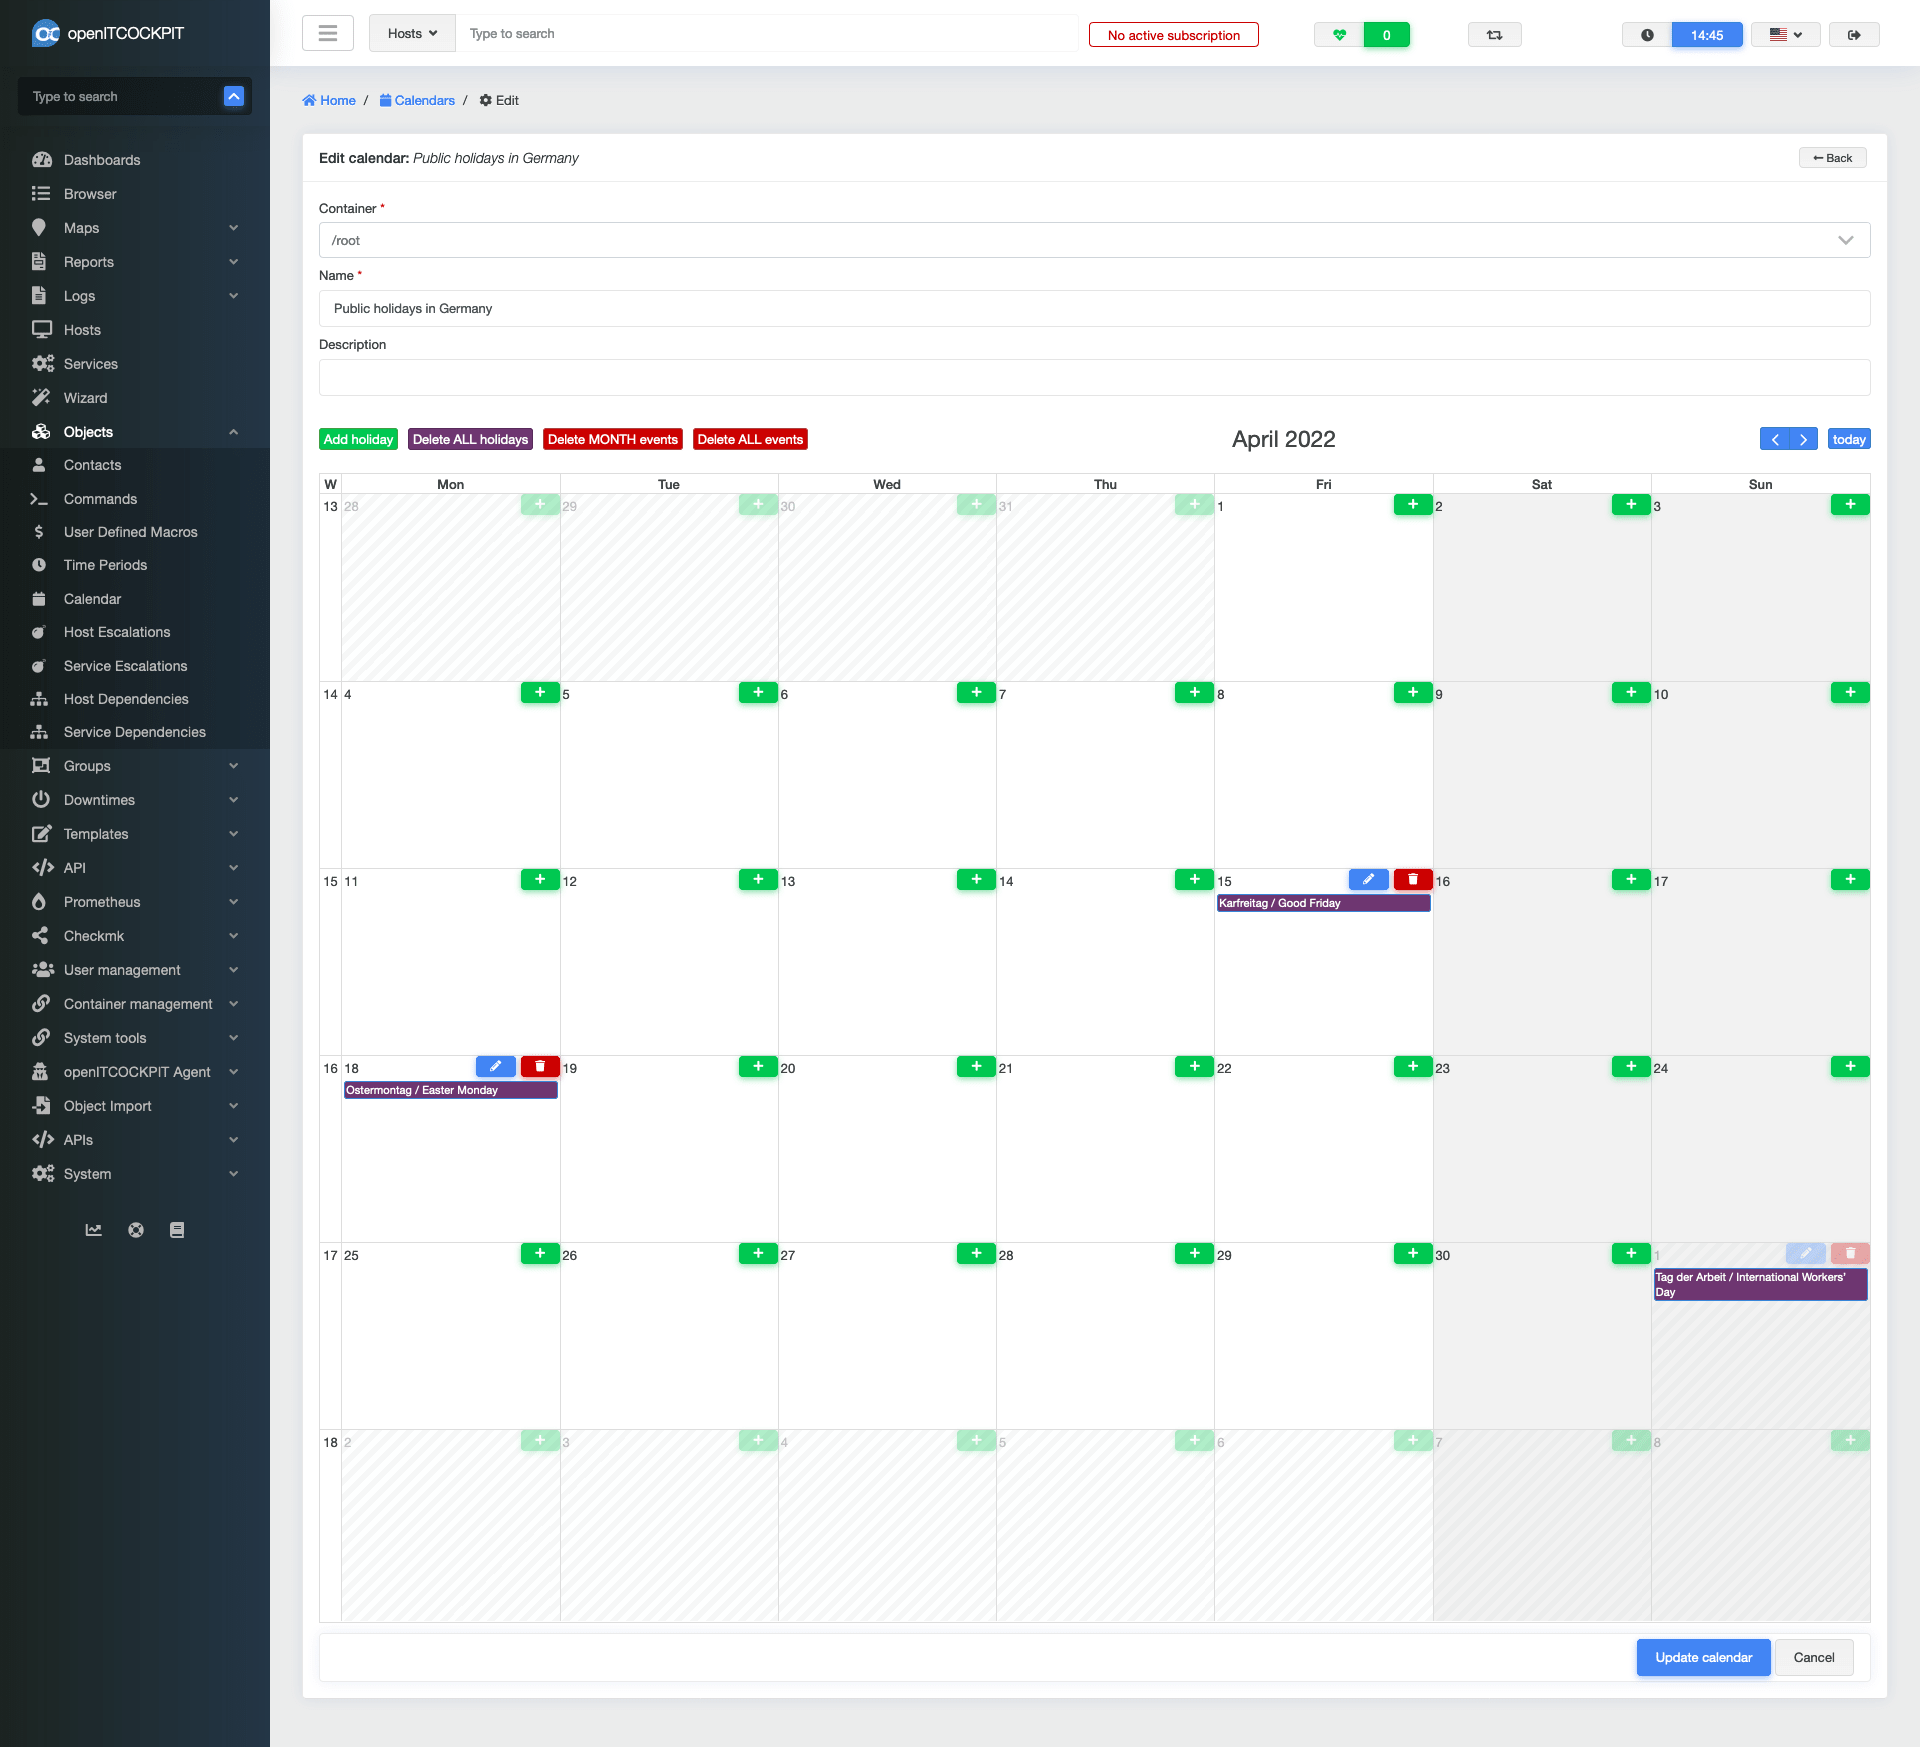 openITCOCKPIT has pre-defined and customizable calendars which can be considered by reports or to suppress notifications on public holidays